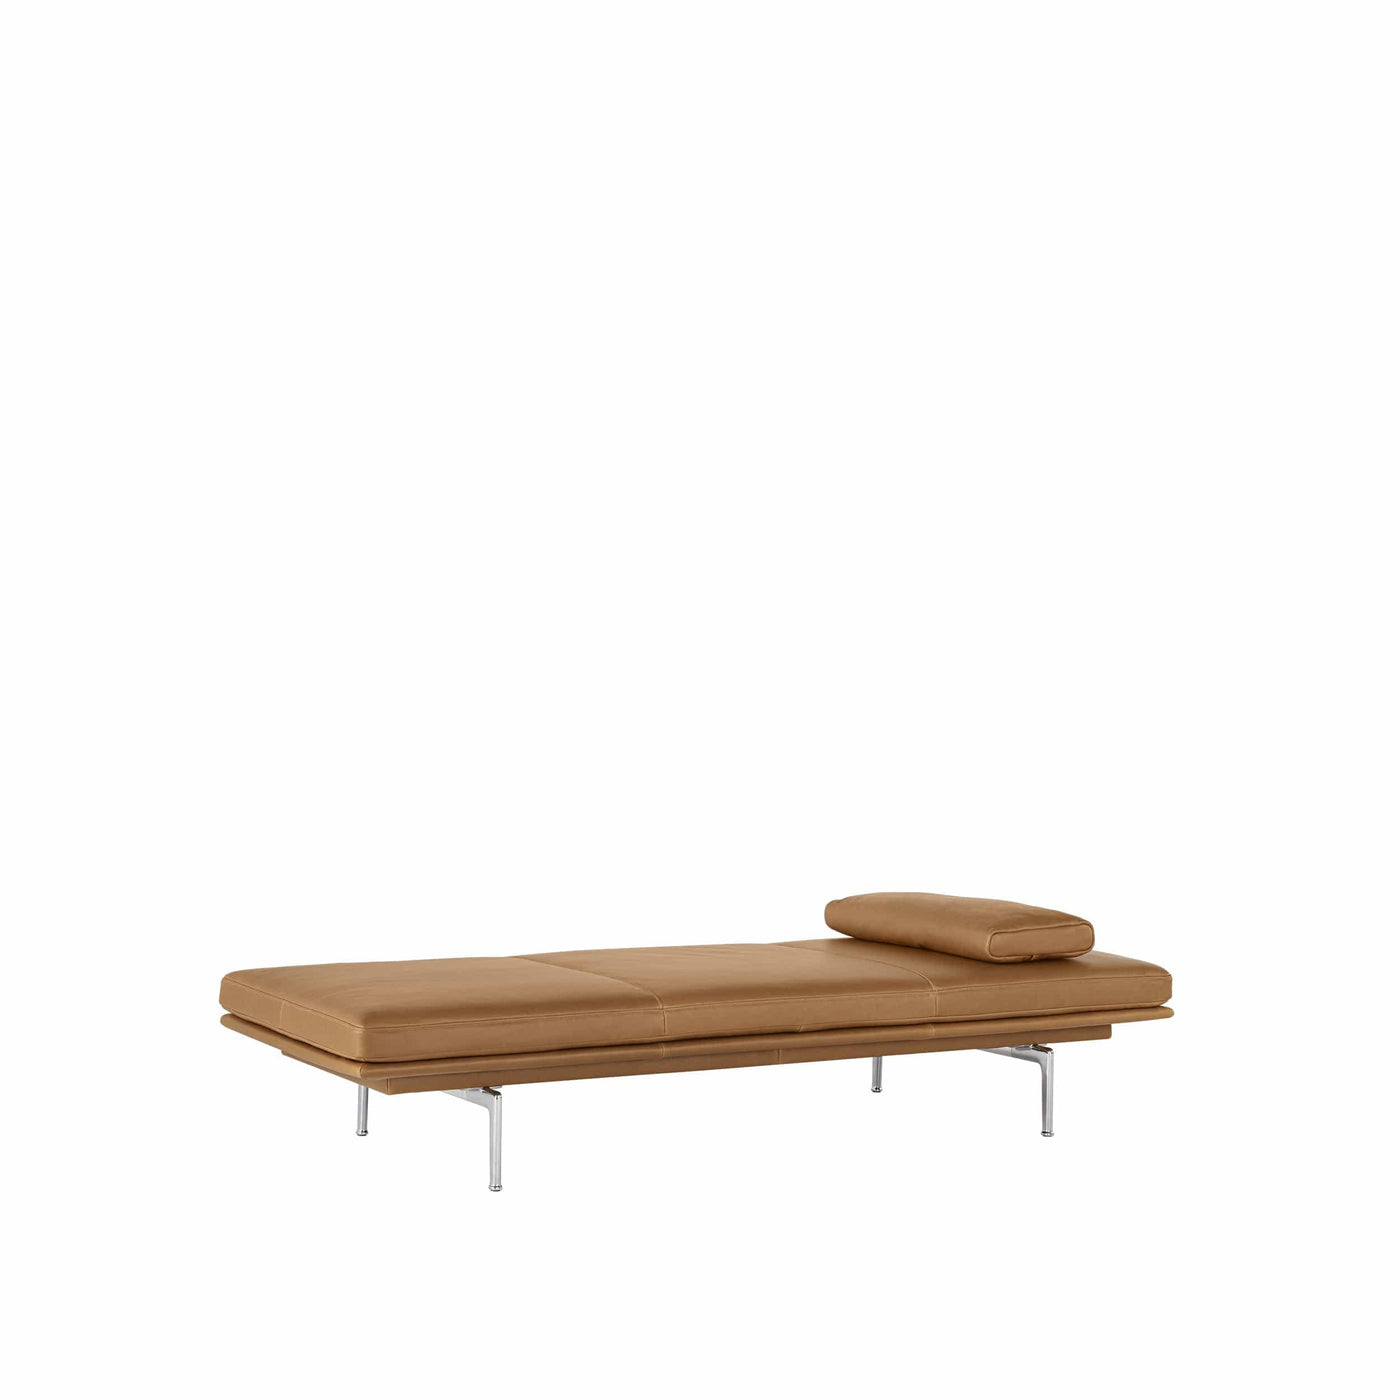 Muuto Outline Daybed in cognac refine leather. Made to order from someday designs.